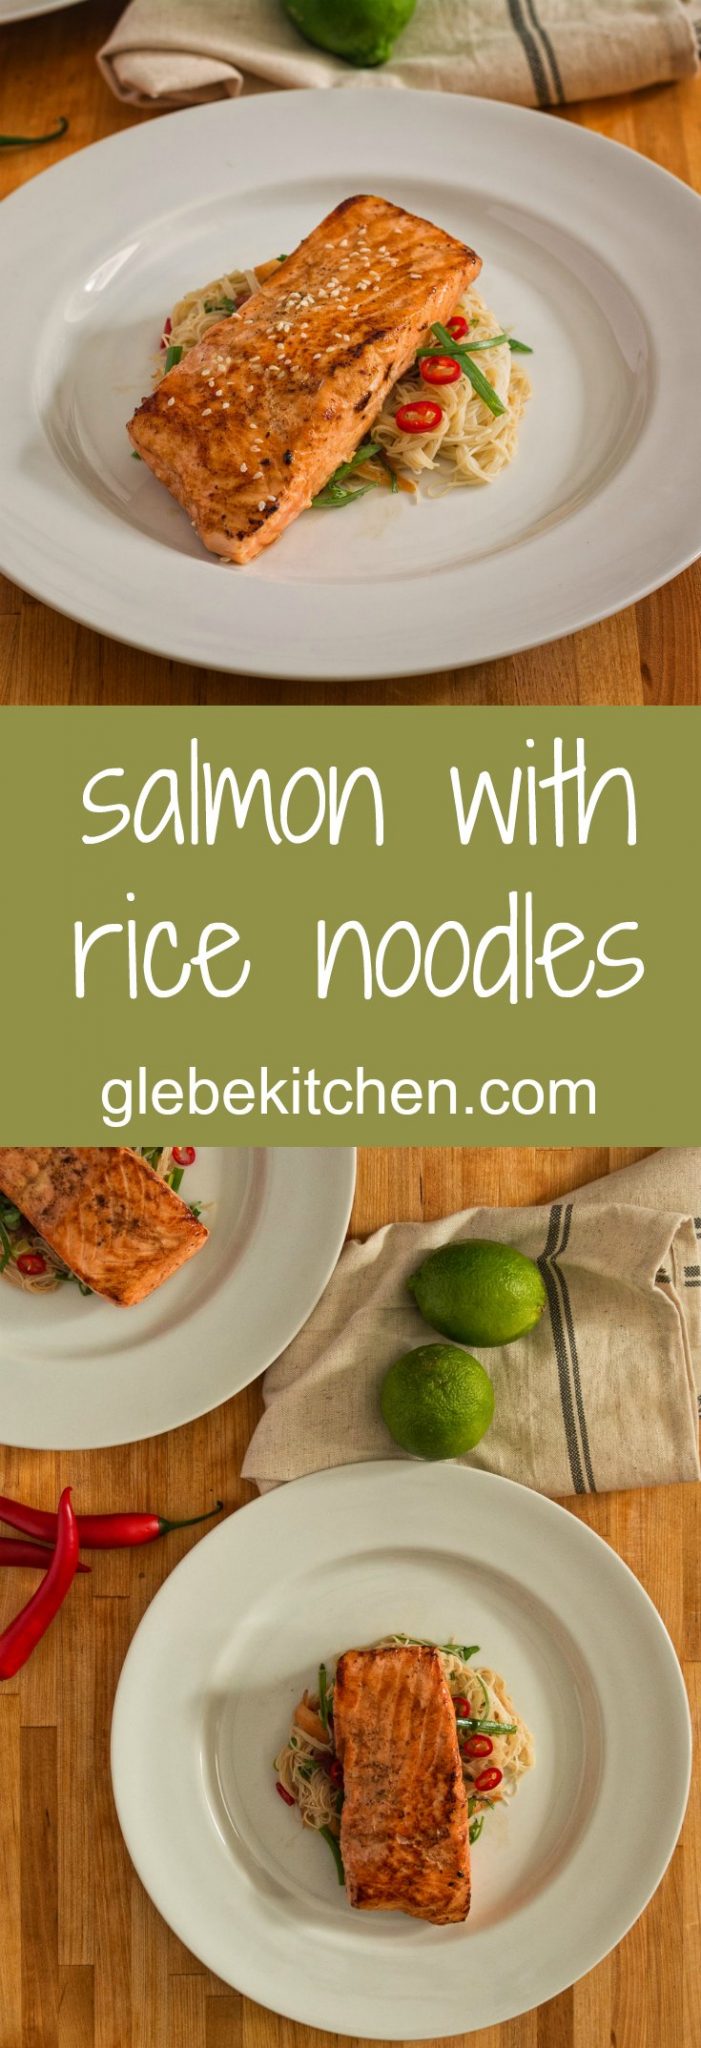 Salmon with rice noodle salad makes a great weeknight meal.